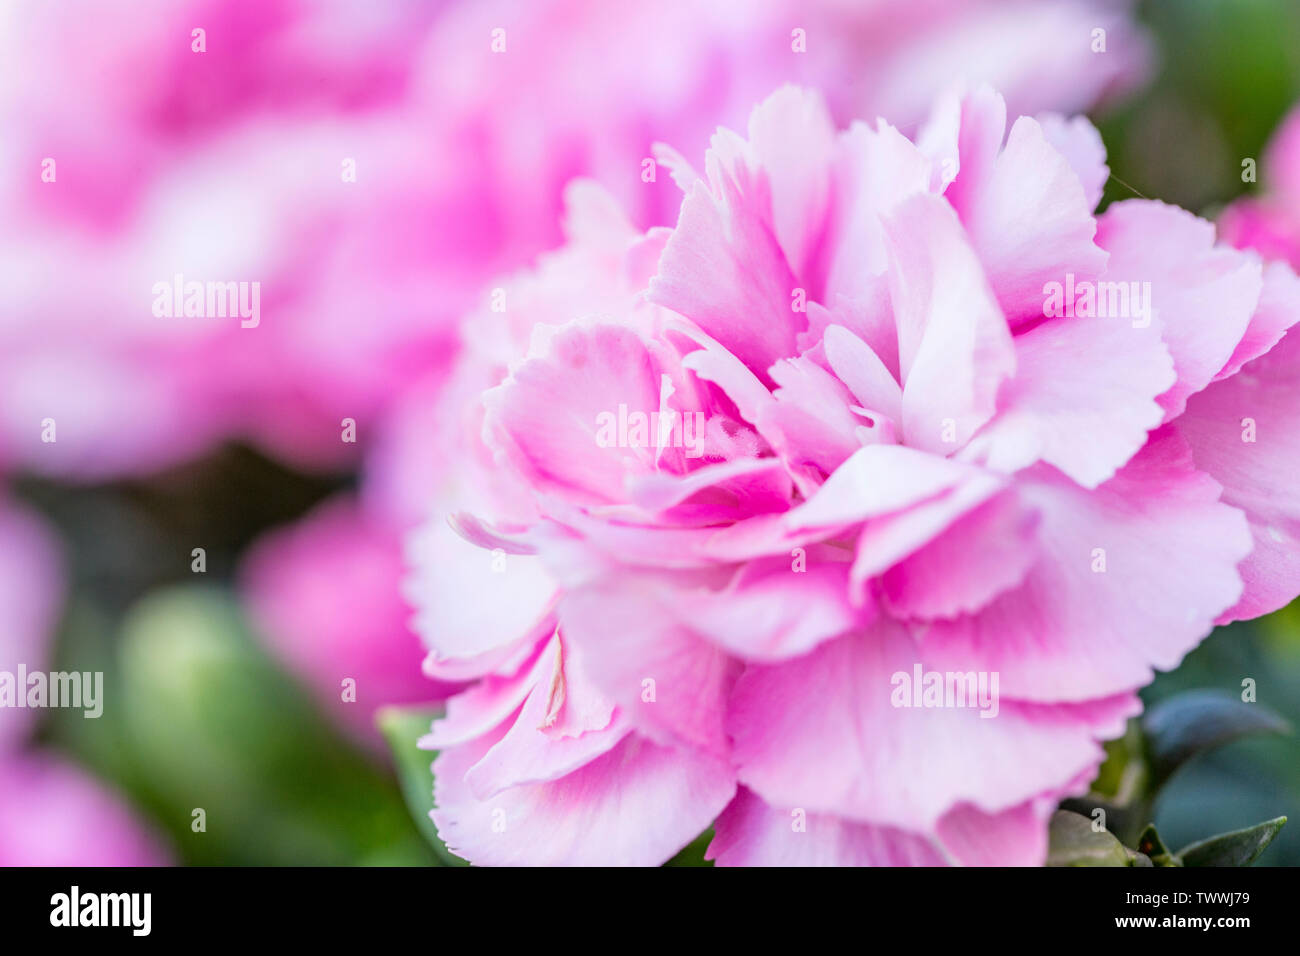 Close up of a flowering Dianthus/pink/carnation blossom Stock Photo